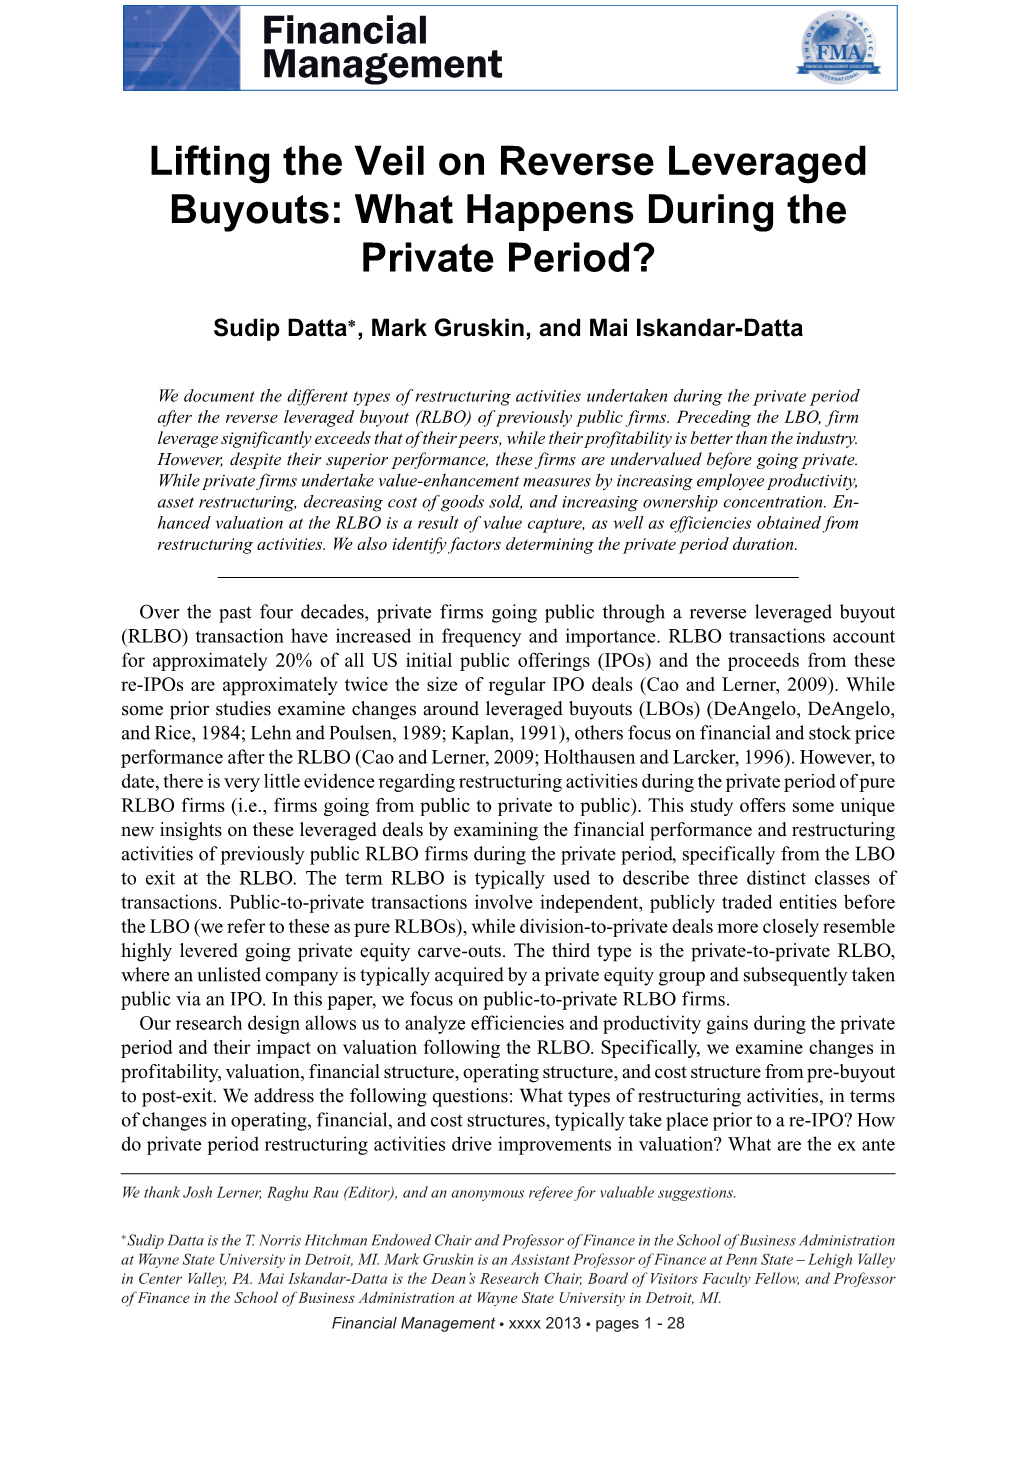 Lifting the Veil on Reverse Leveraged Buyouts: What Happens During the Private Period?